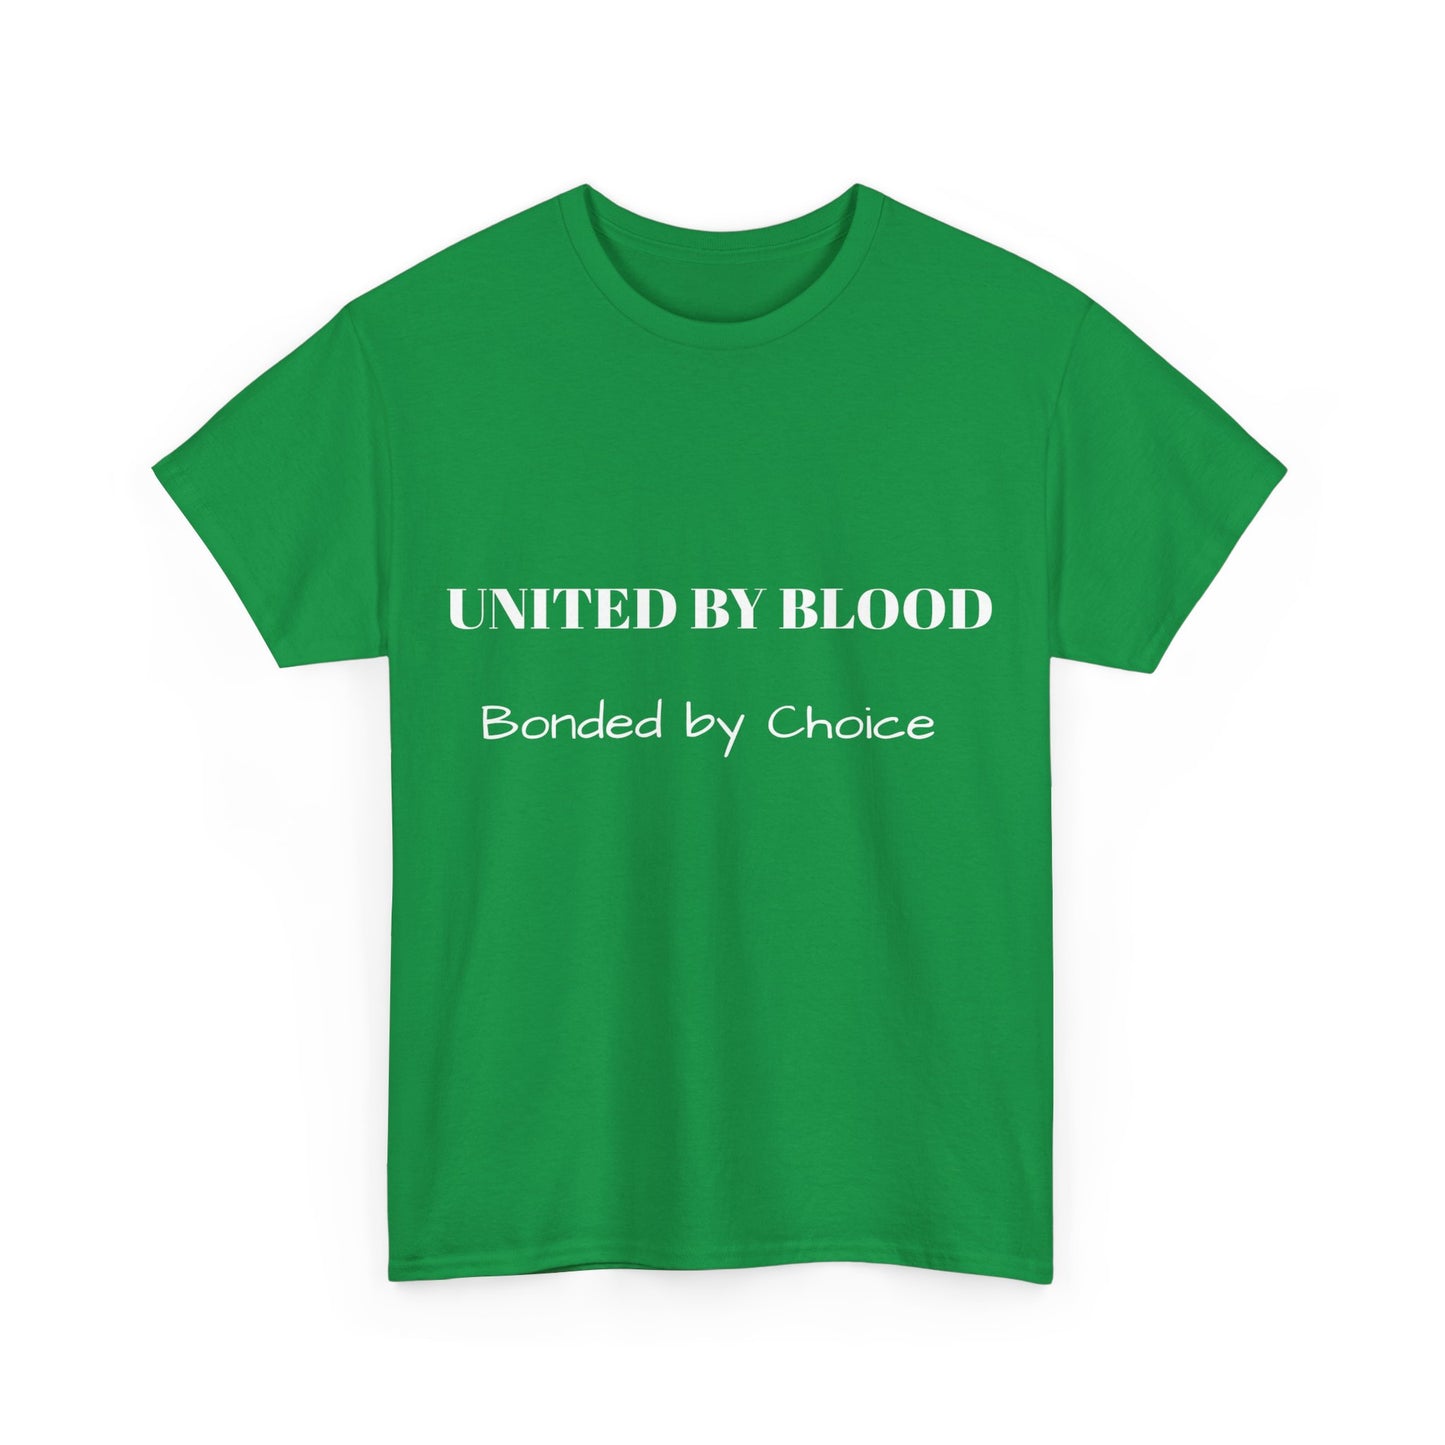 United by Blood, Bonded by Choice